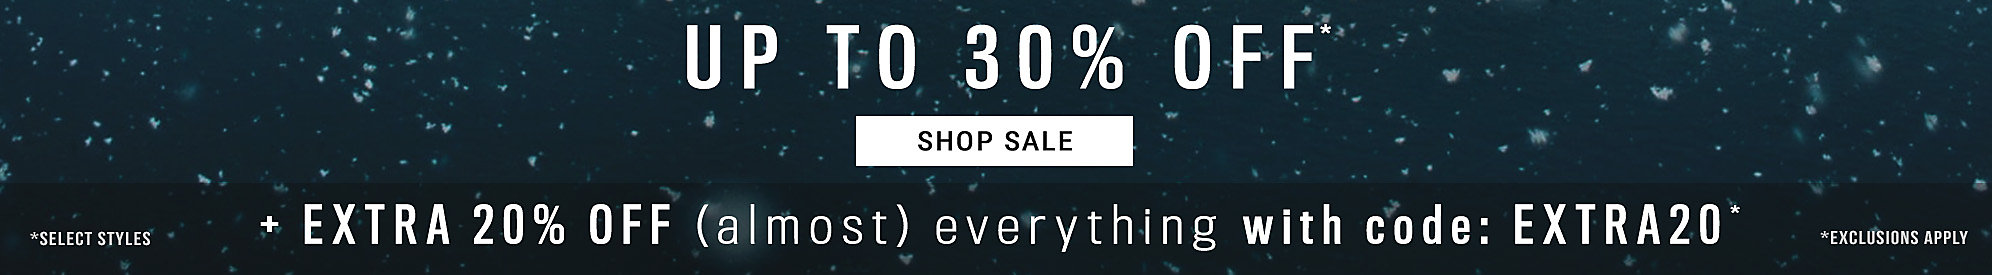 Up To 30% Off + Take an Extra 20% Off* (Almost) Everything with code: EXTRA20